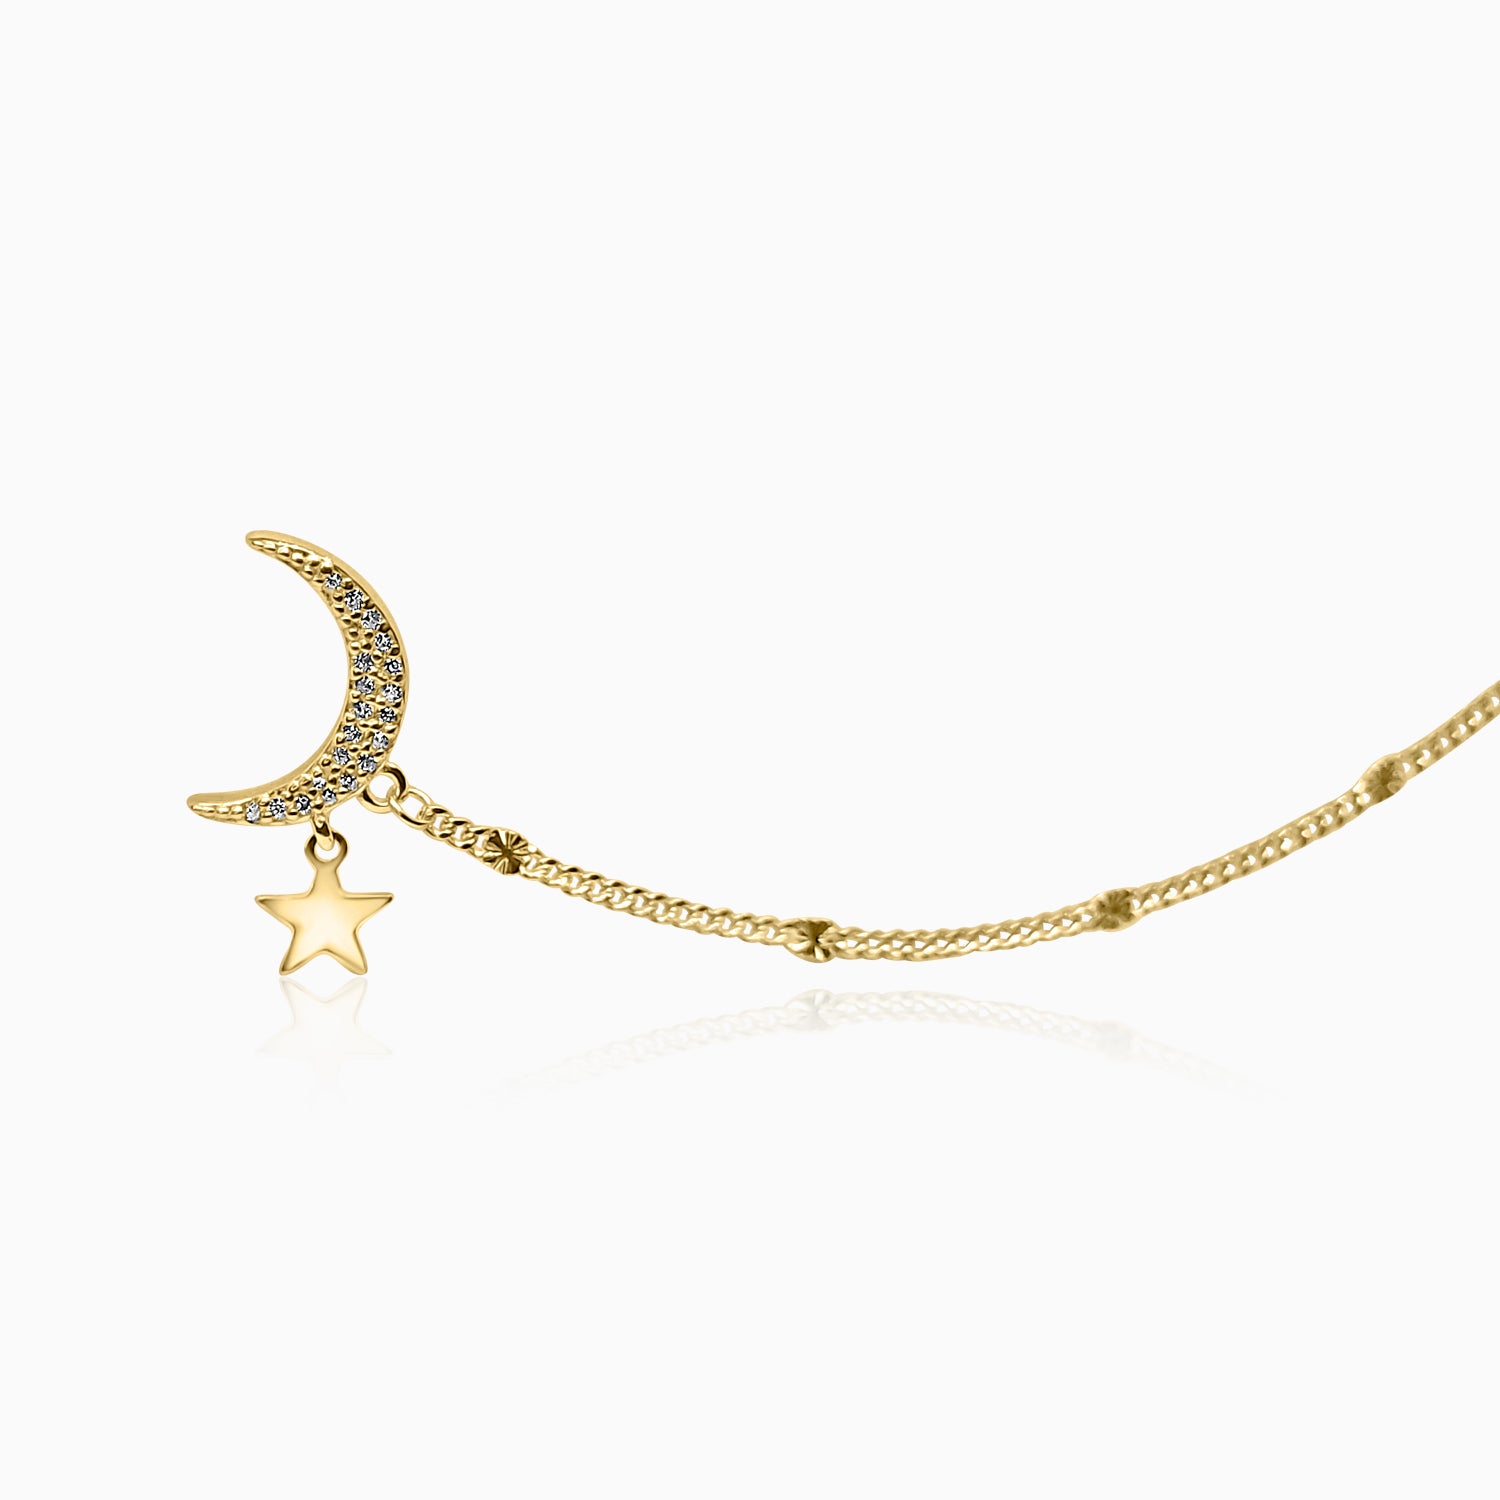 Silver Gold Sparkling Moon Star Earrings with Chain Clip On